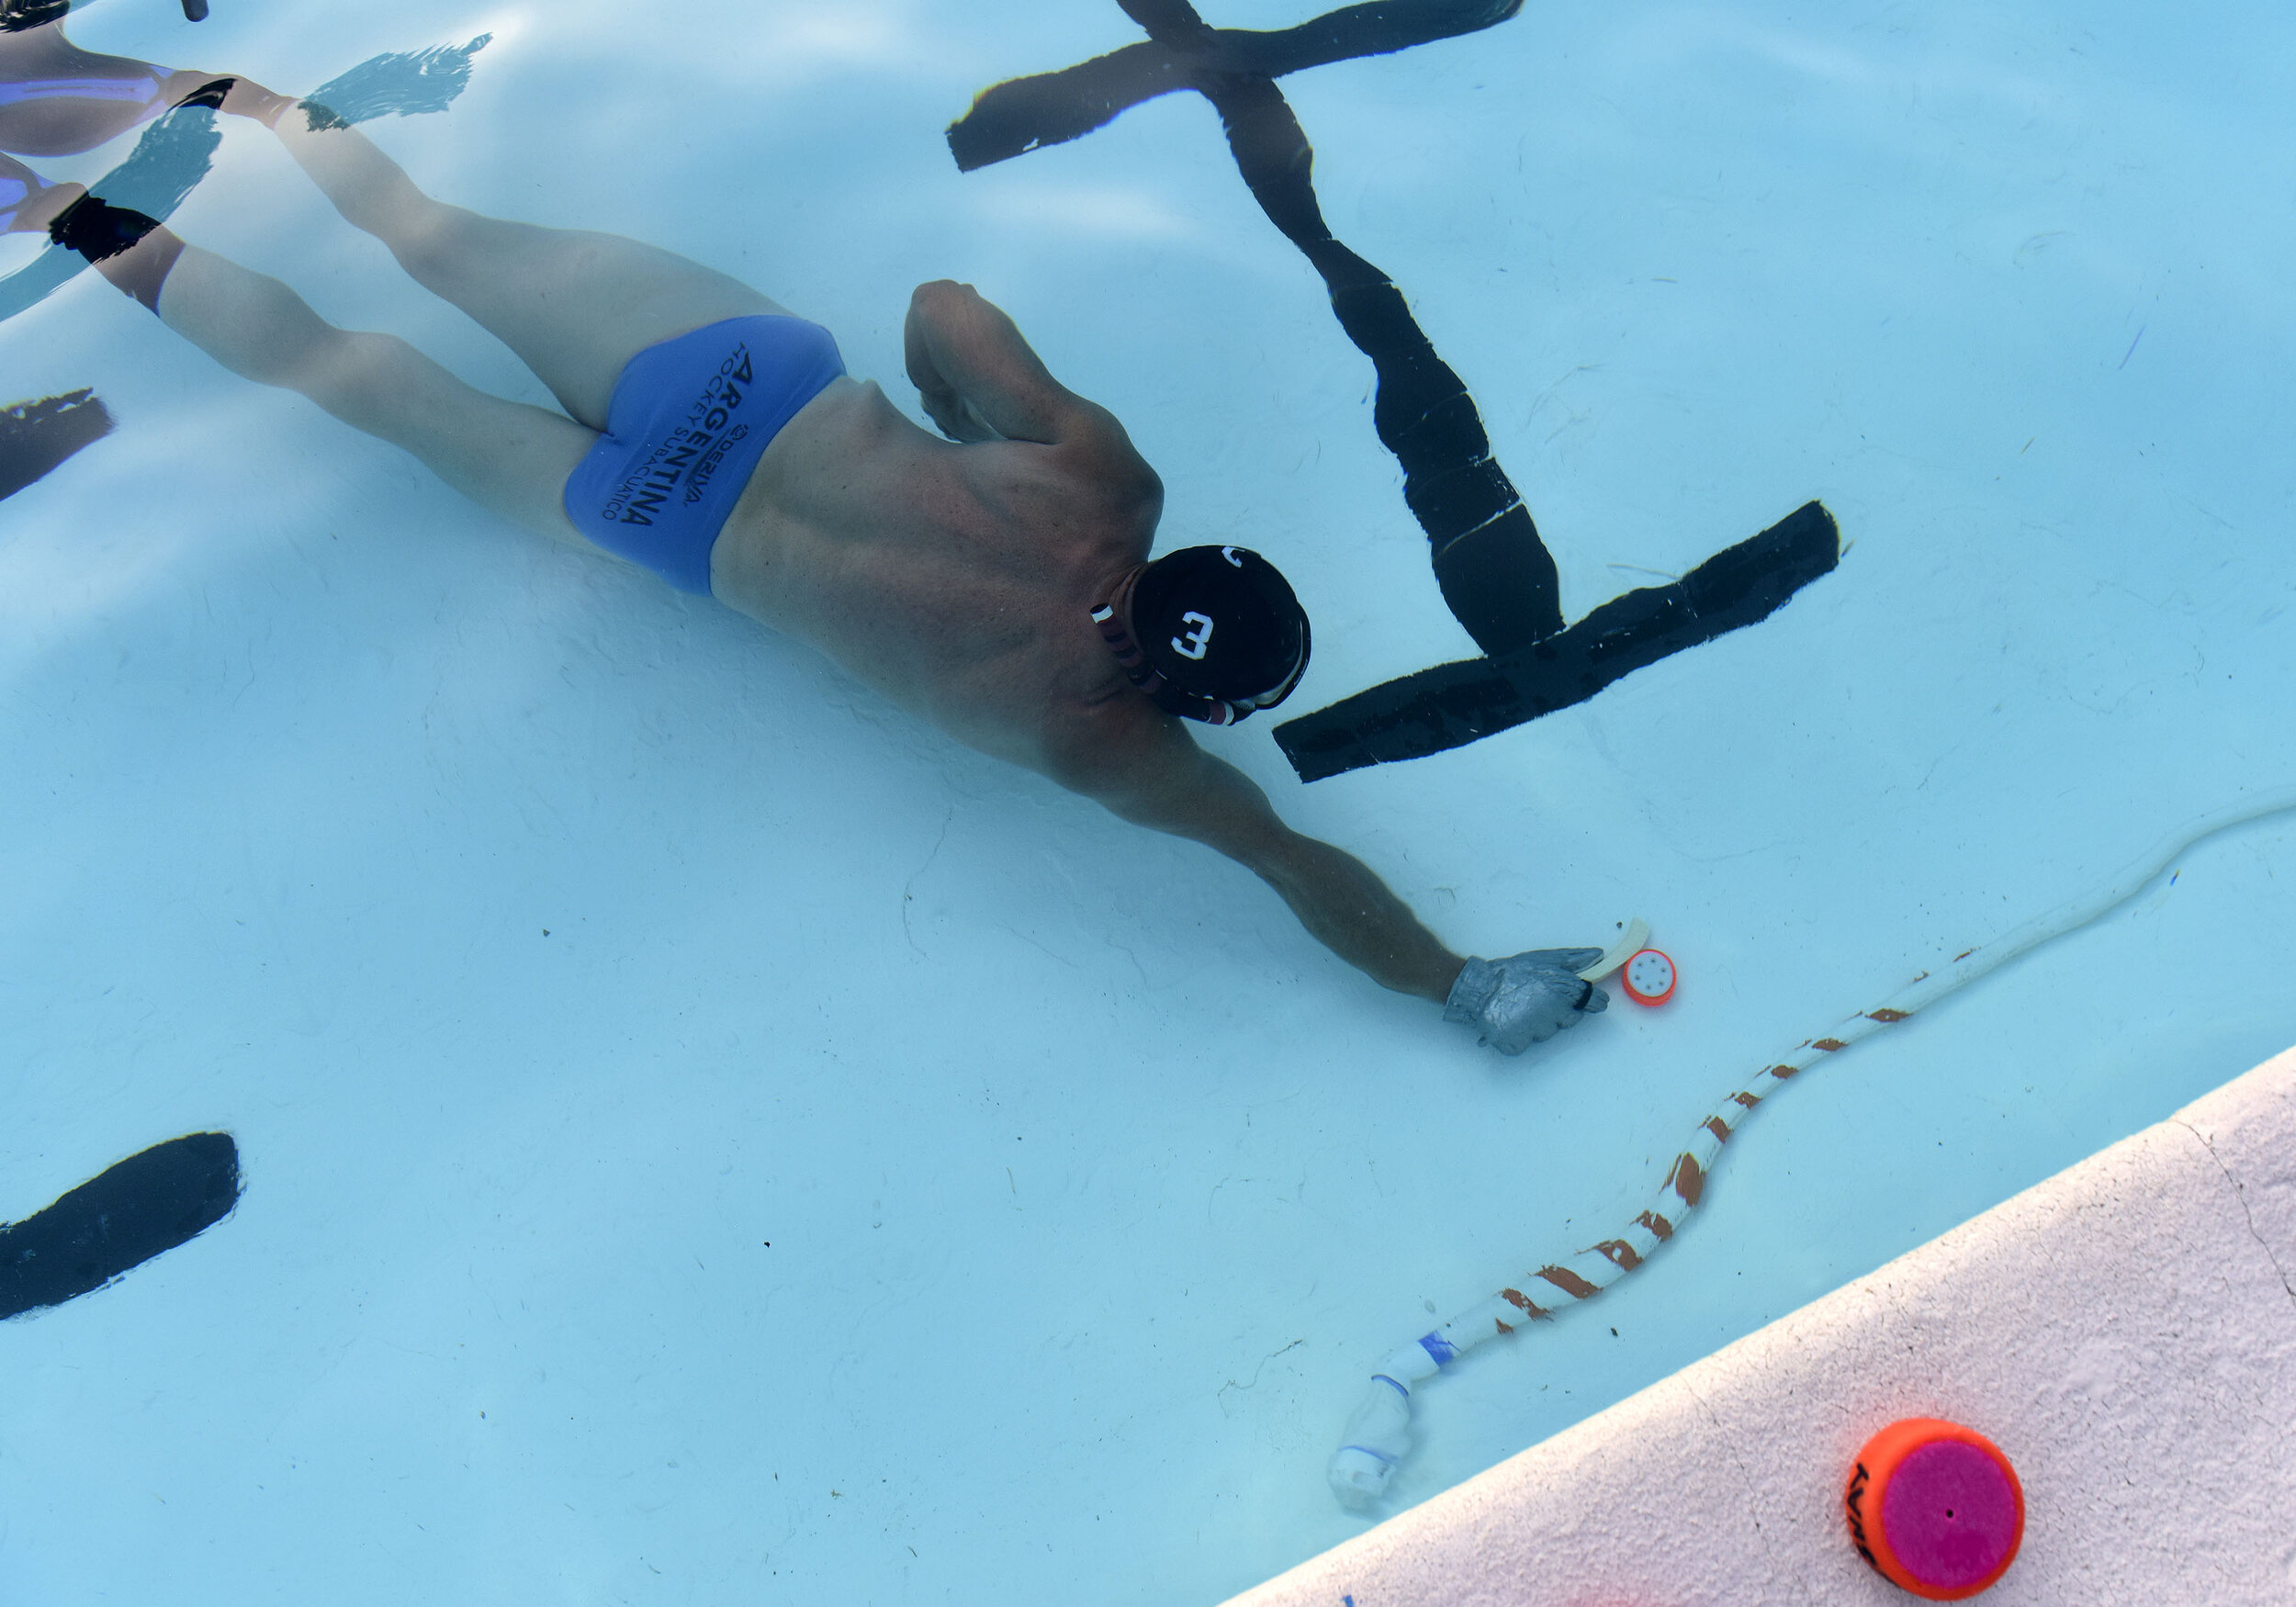  Pat Hanrahan goes to score a goal during an underwater hockey match at the Hampton Pool Association on Monday, August 12, 2019. Underwater Hockey is a co-ed, non-contact, water sport played on the bottom of the pool where players wear fins, for spee